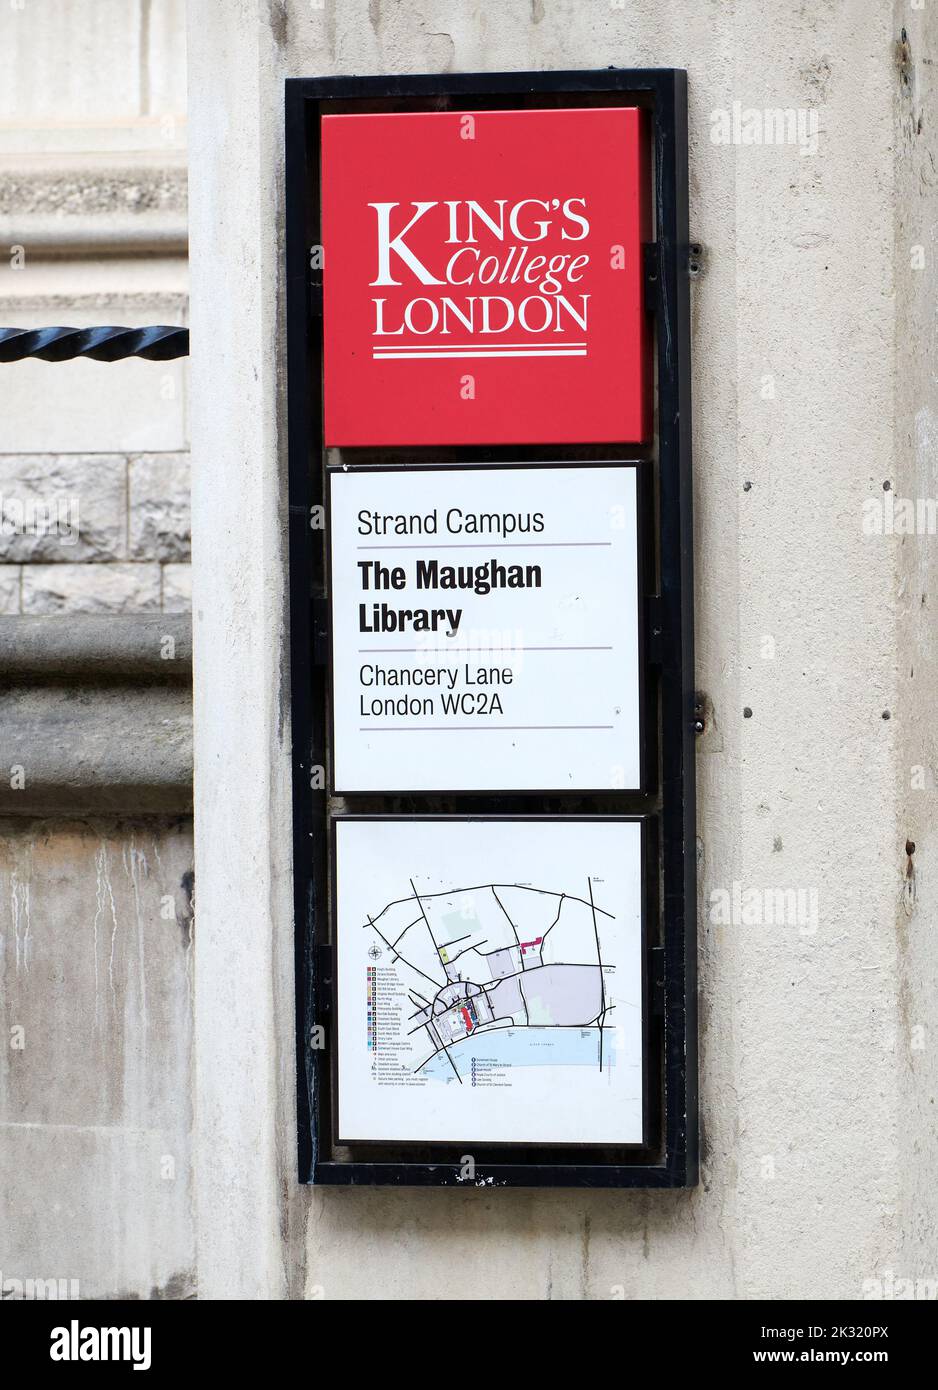 The Maughan library, King's college, Strand campus, University of London, Chancery Lane, London, England. Stock Photo